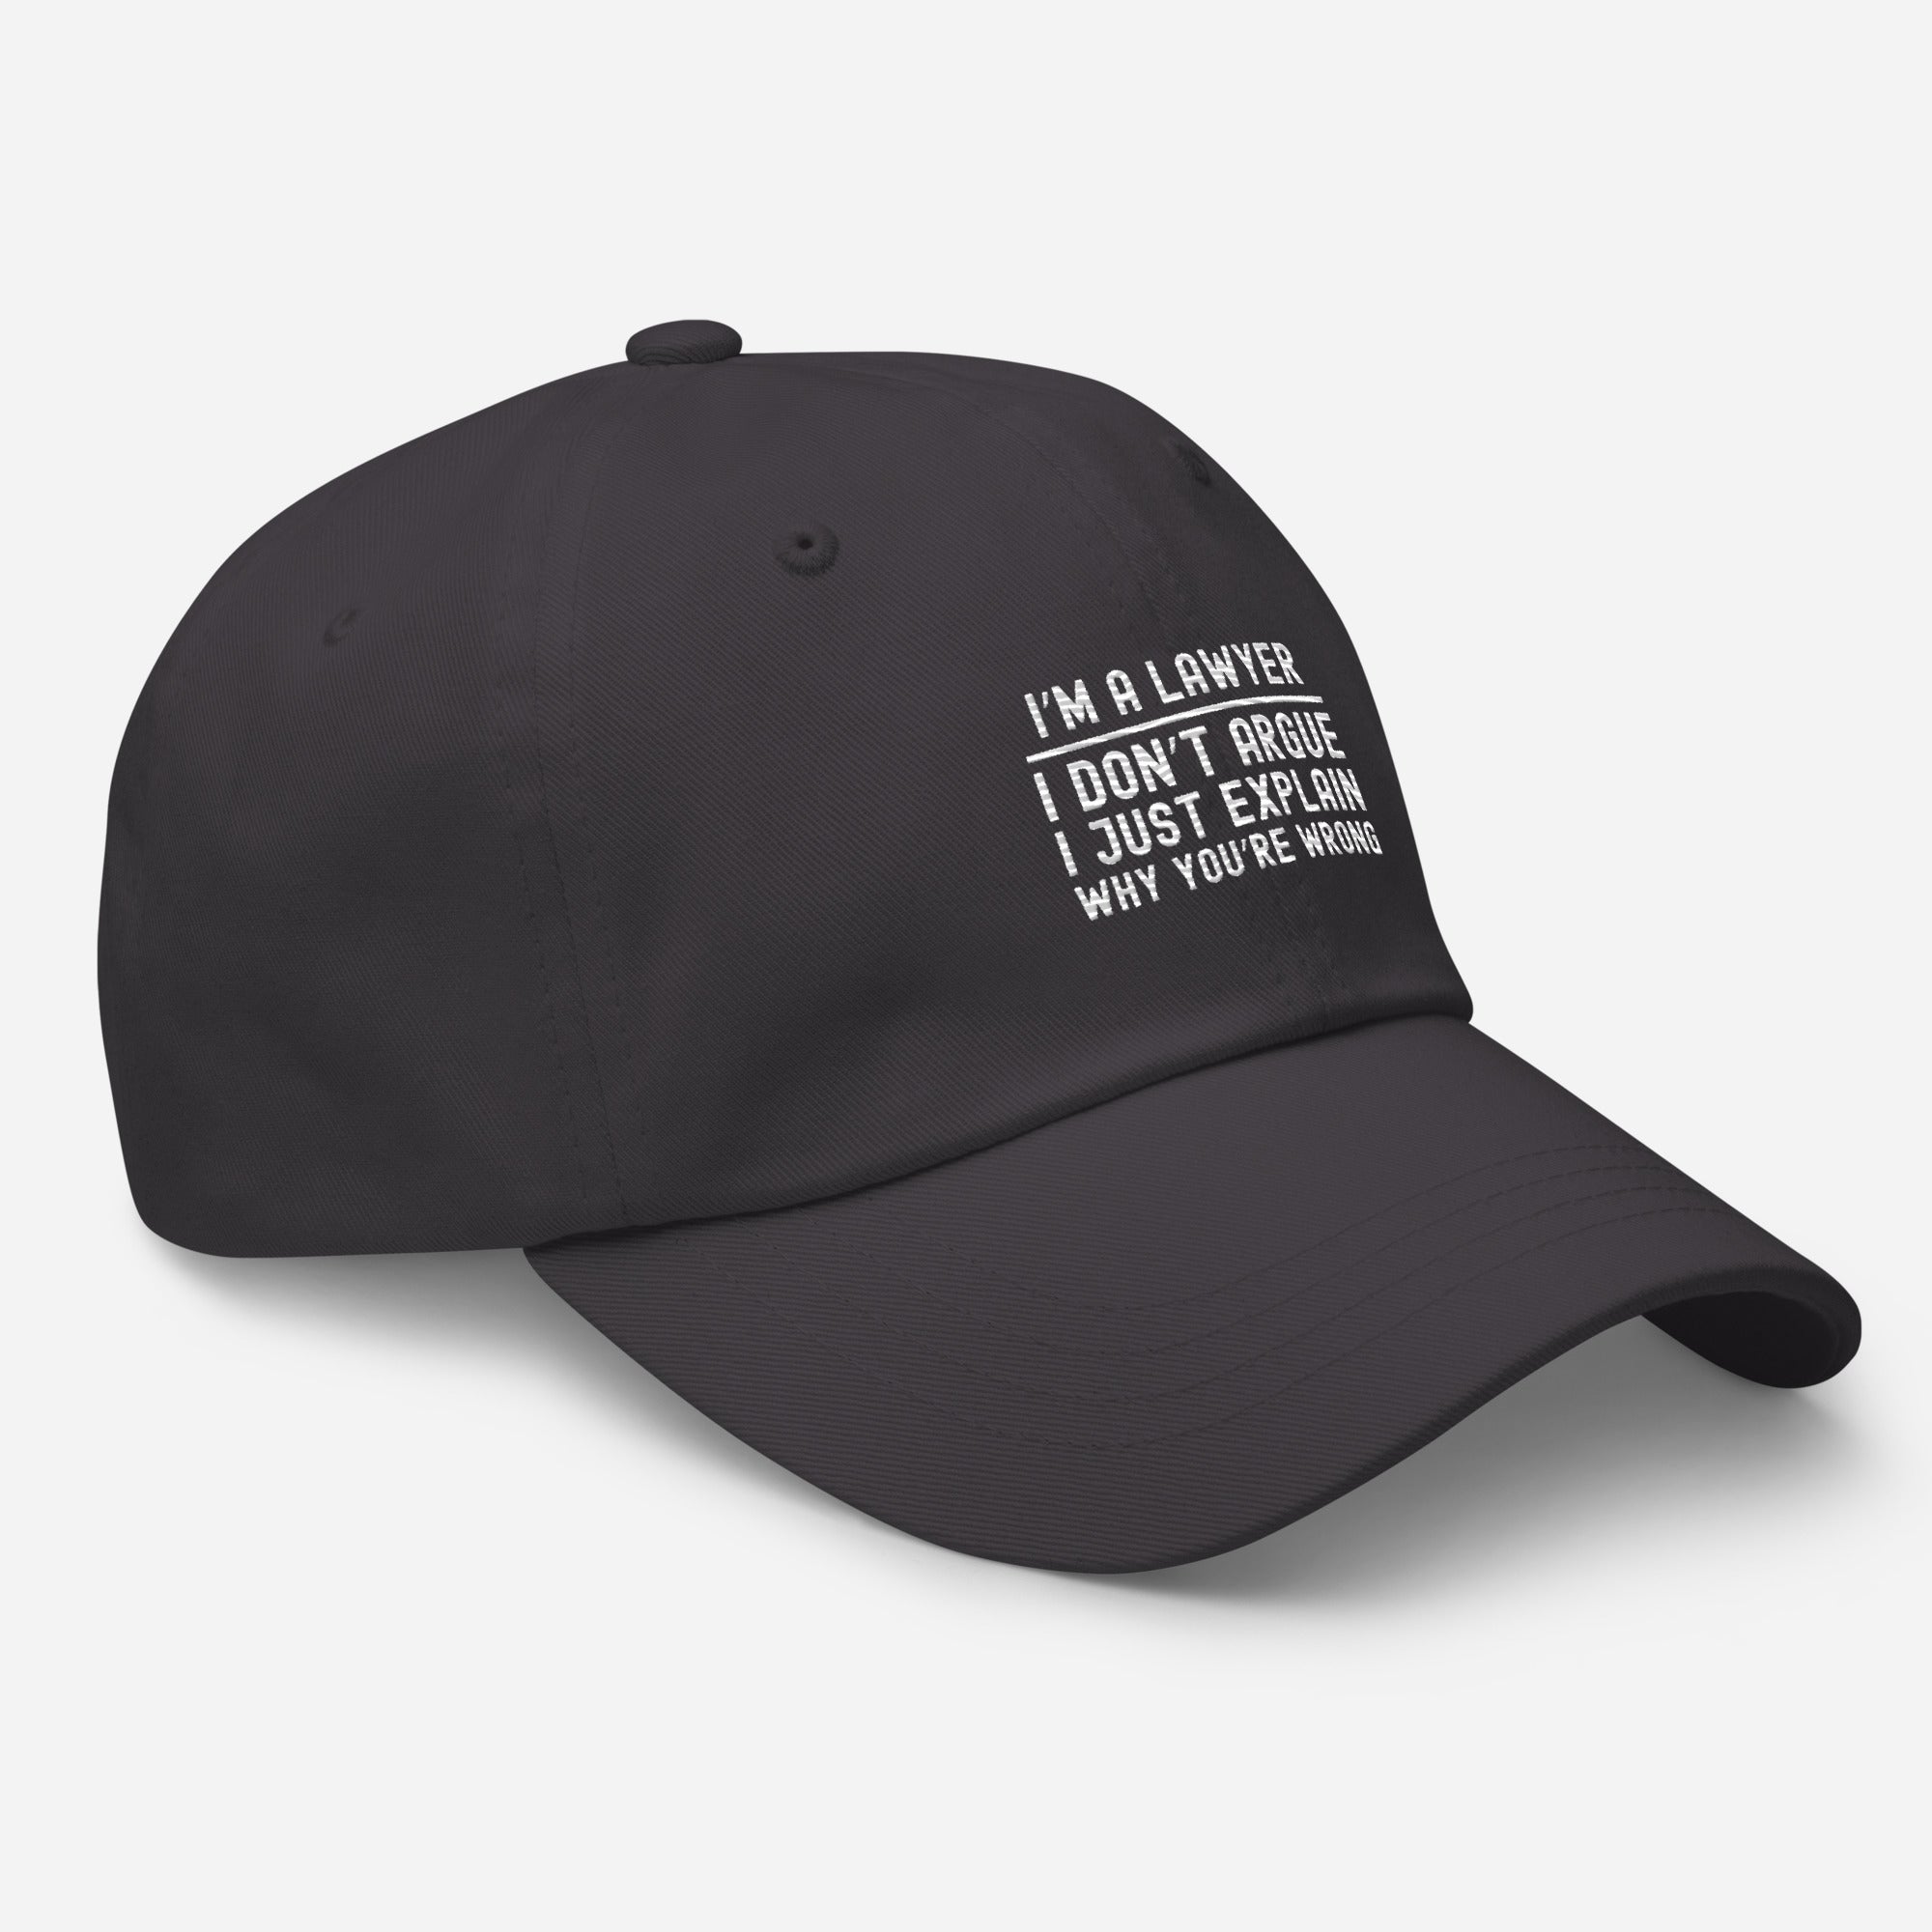 Hat | I’m a lawyer, I don’t argue, I just explain why you’re wrong